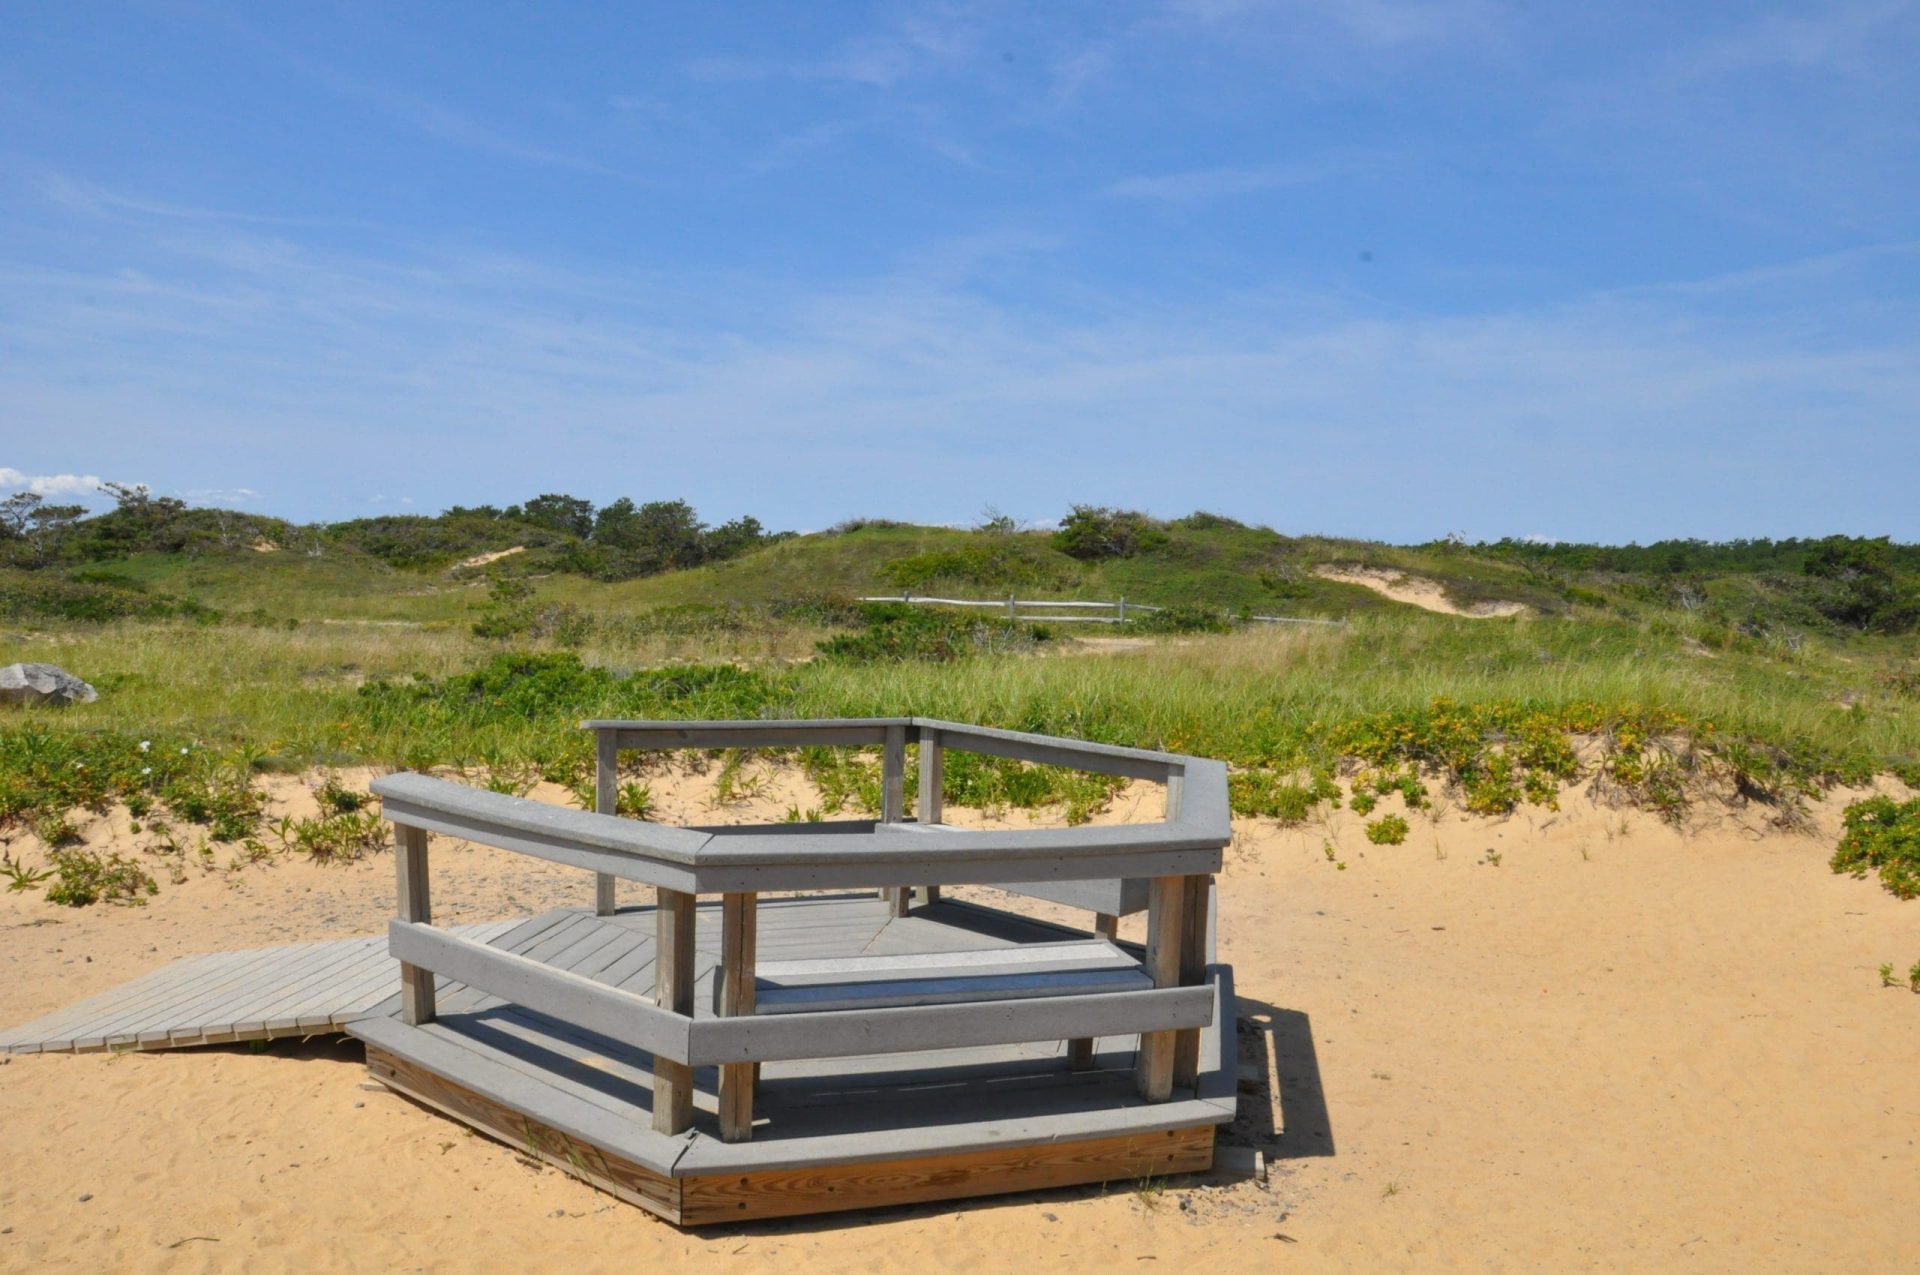 Cape Cod and Provincetown Scenic Self-Guided Driving Tour